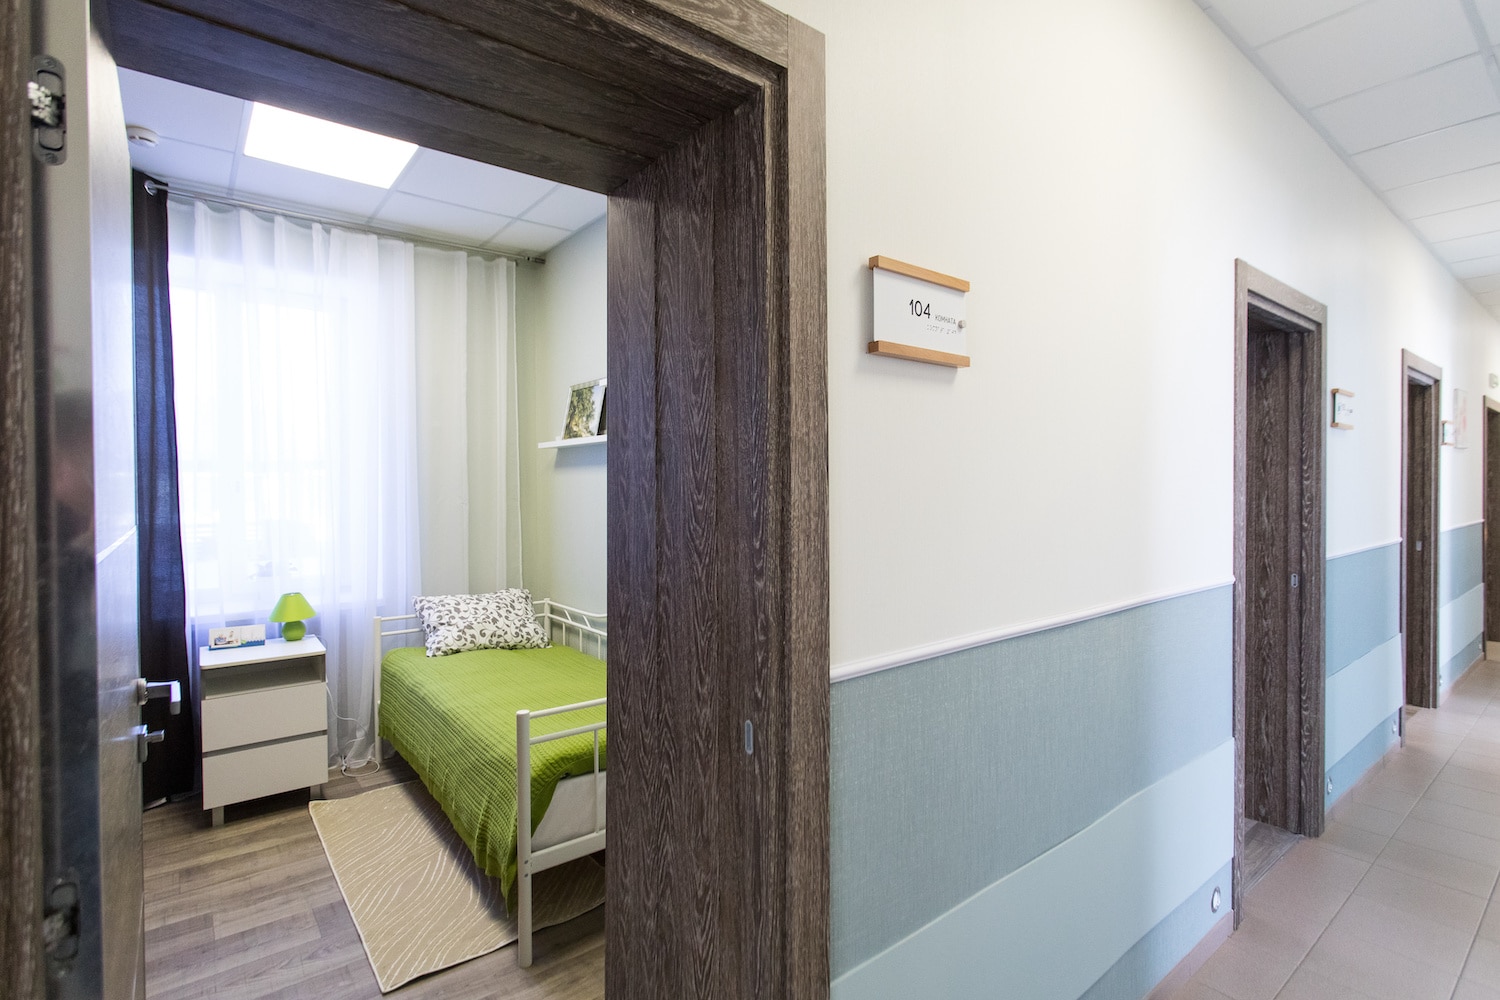 nursing home versus memory care room with green bed